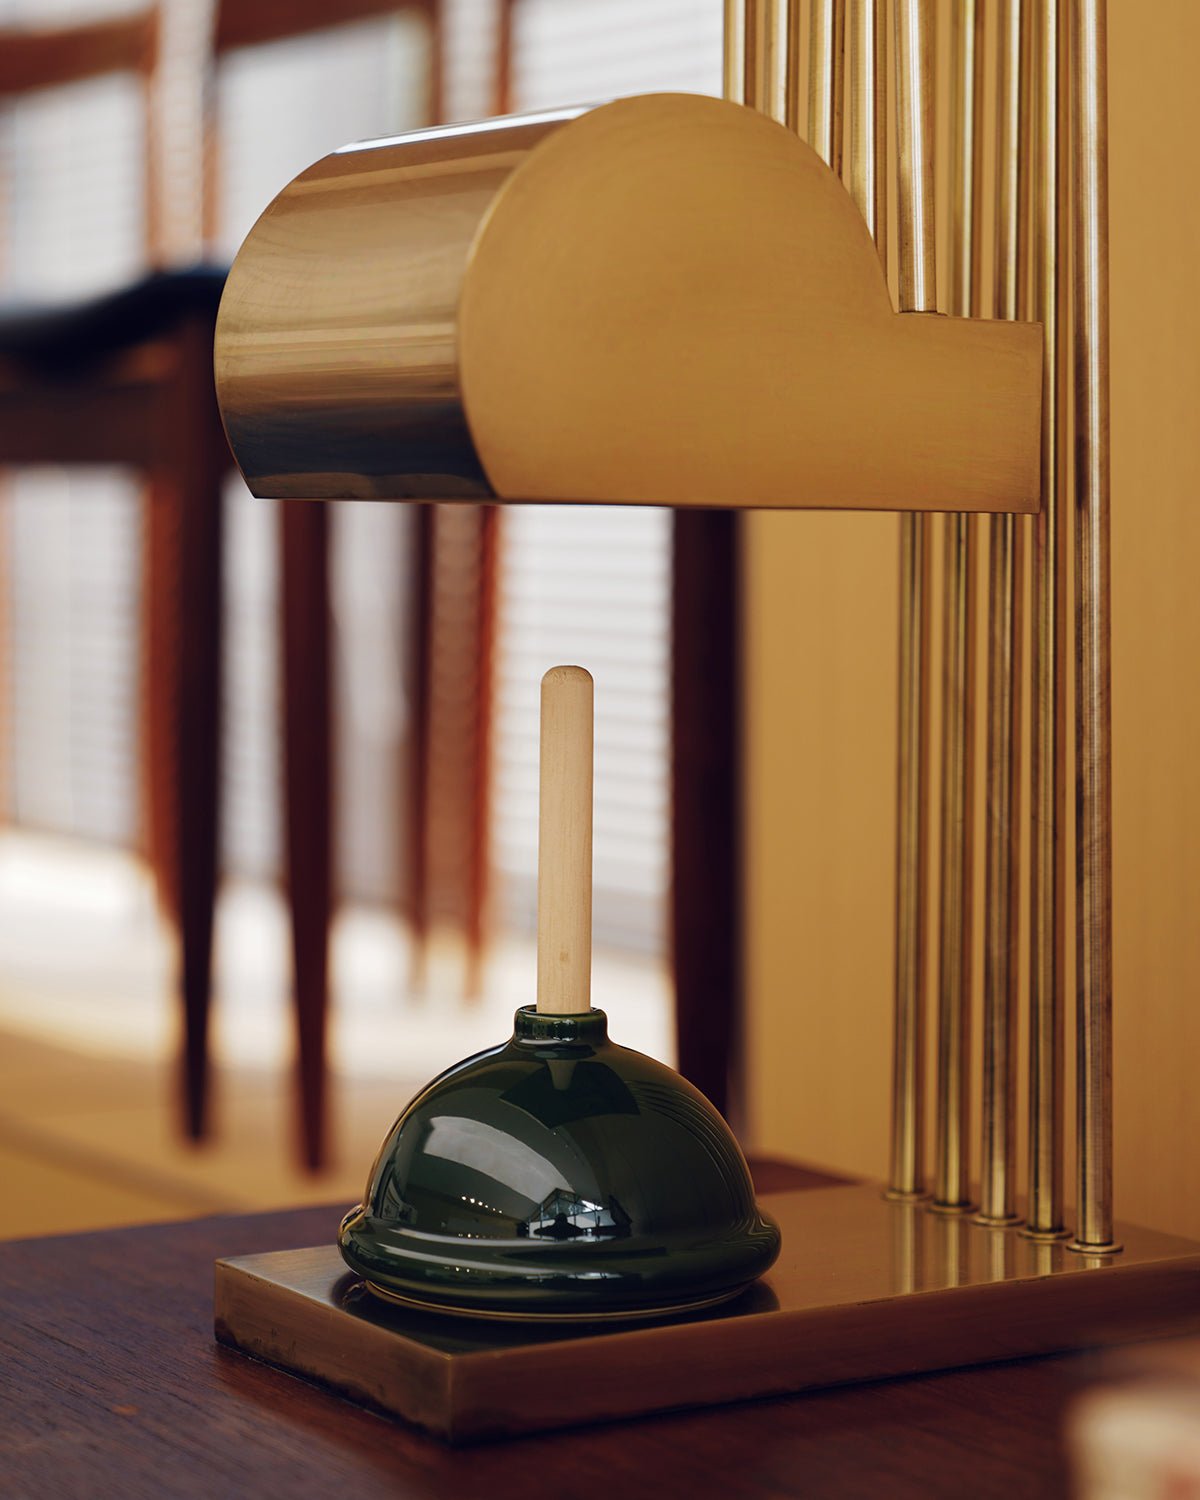 Plunger-Shaped Diffuser with Oil Refill